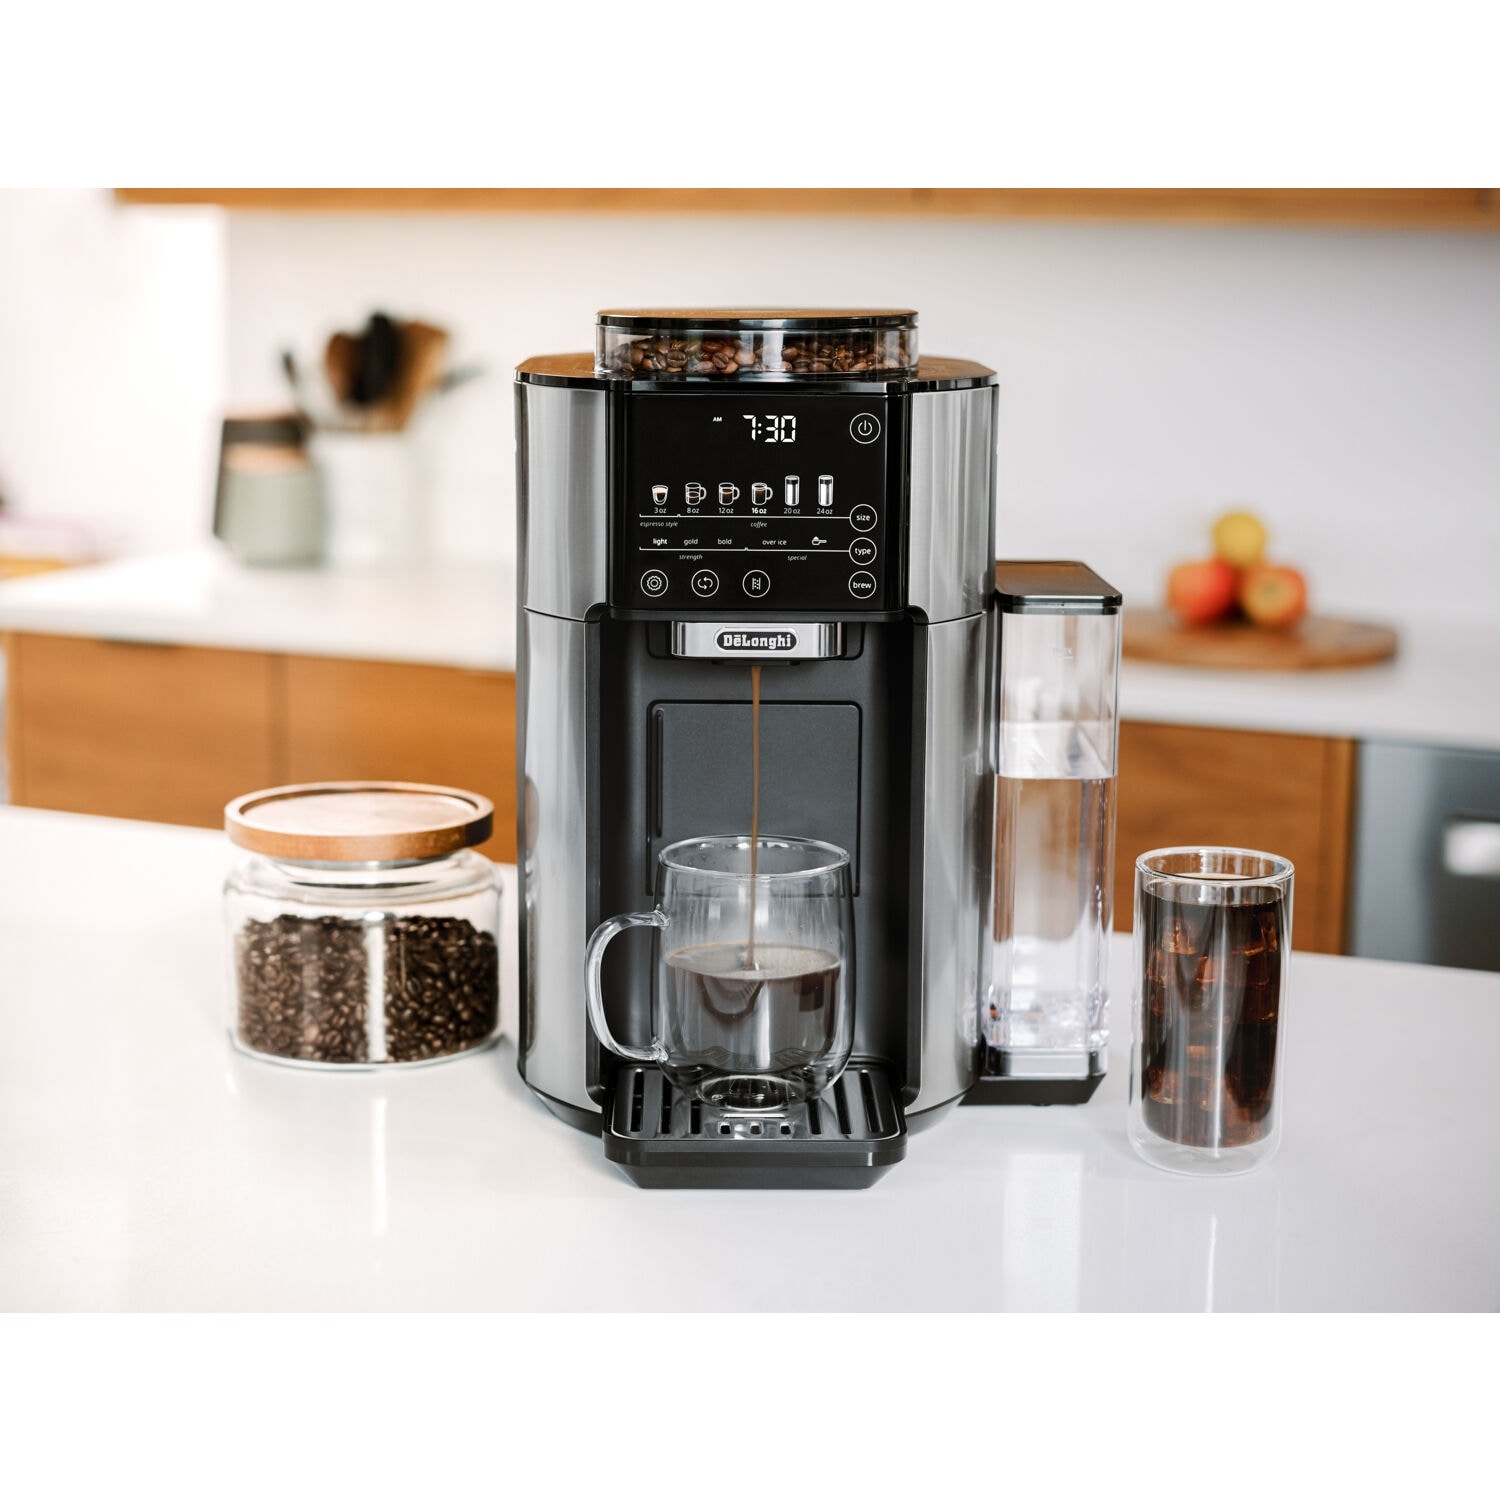 https://ak1.ostkcdn.com/images/products/is/images/direct/dcadadbde600f00351d1fedb517388685445b255/DeLonghi-TrueBrew-Automatic-Single-Serve-Drip-Coffee-Maker-with-Built-In-Grinder-and-Bean-Extract-Technology.jpg